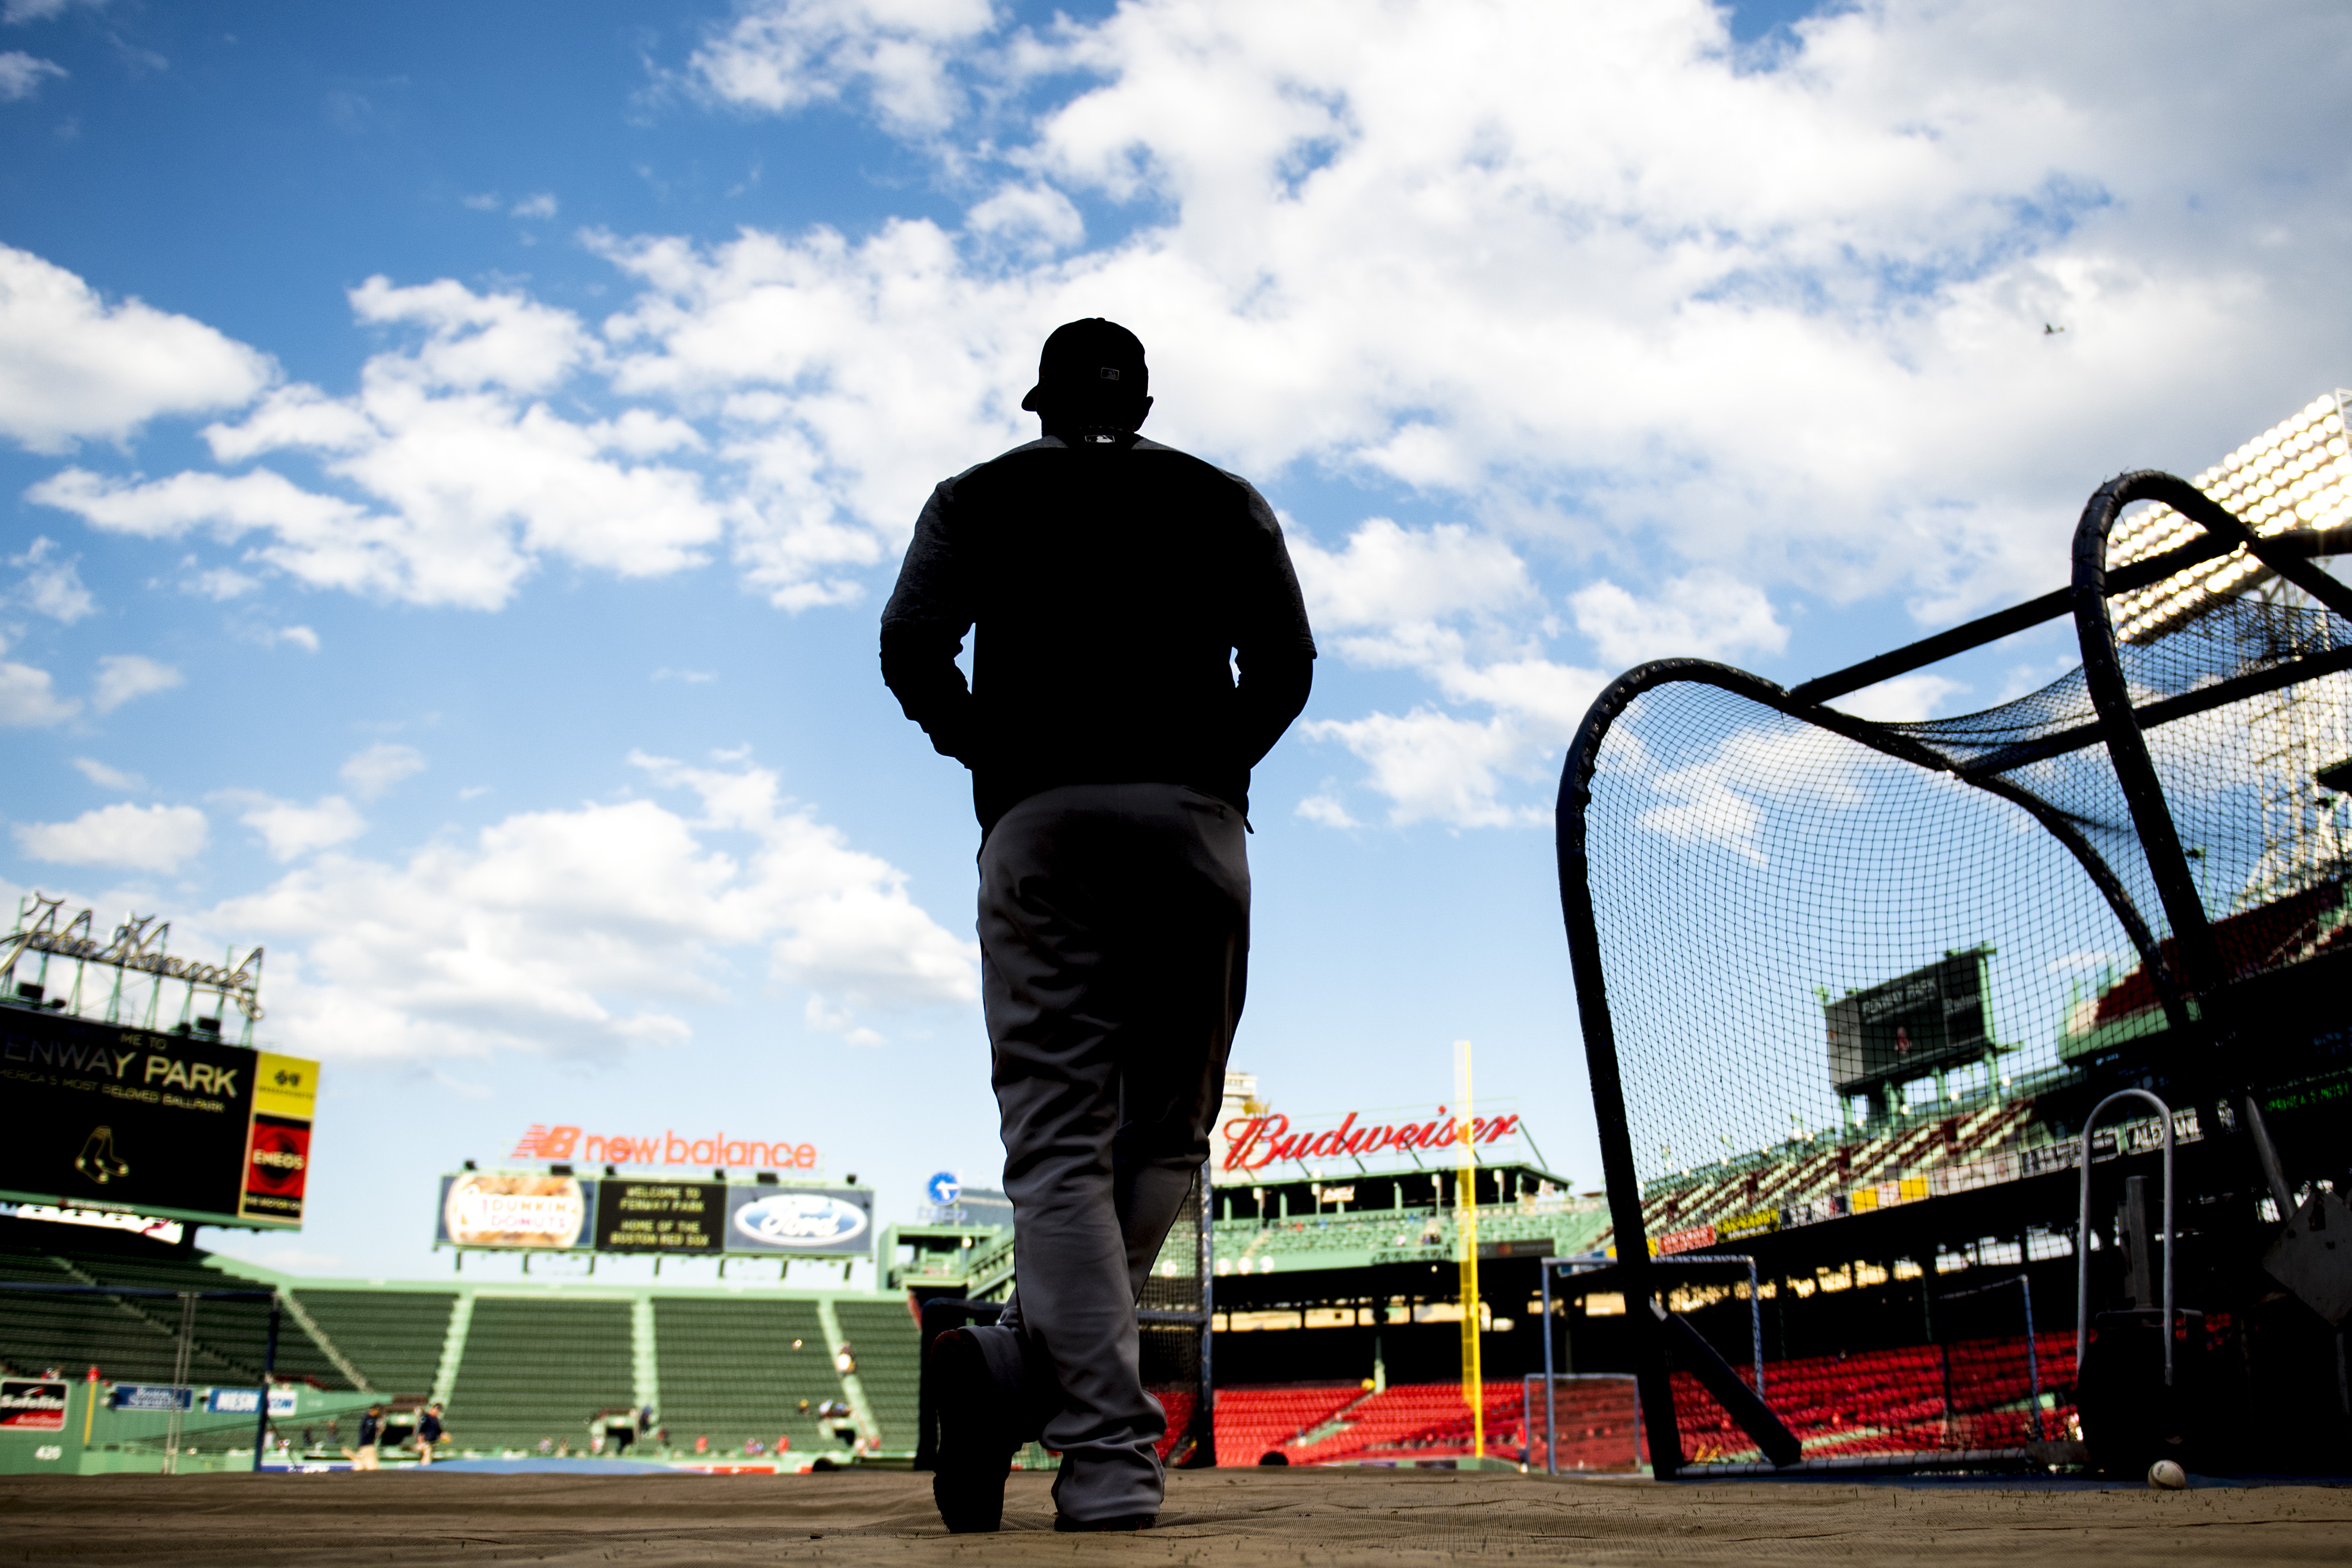 Adam Jones of the Baltimore Orioles looks on before a game against the Boston Red Sox on May 2, 2017 at Fenway Park in Boston. (Billie Weiss/Boston Red Sox&mdash;Getty Images)